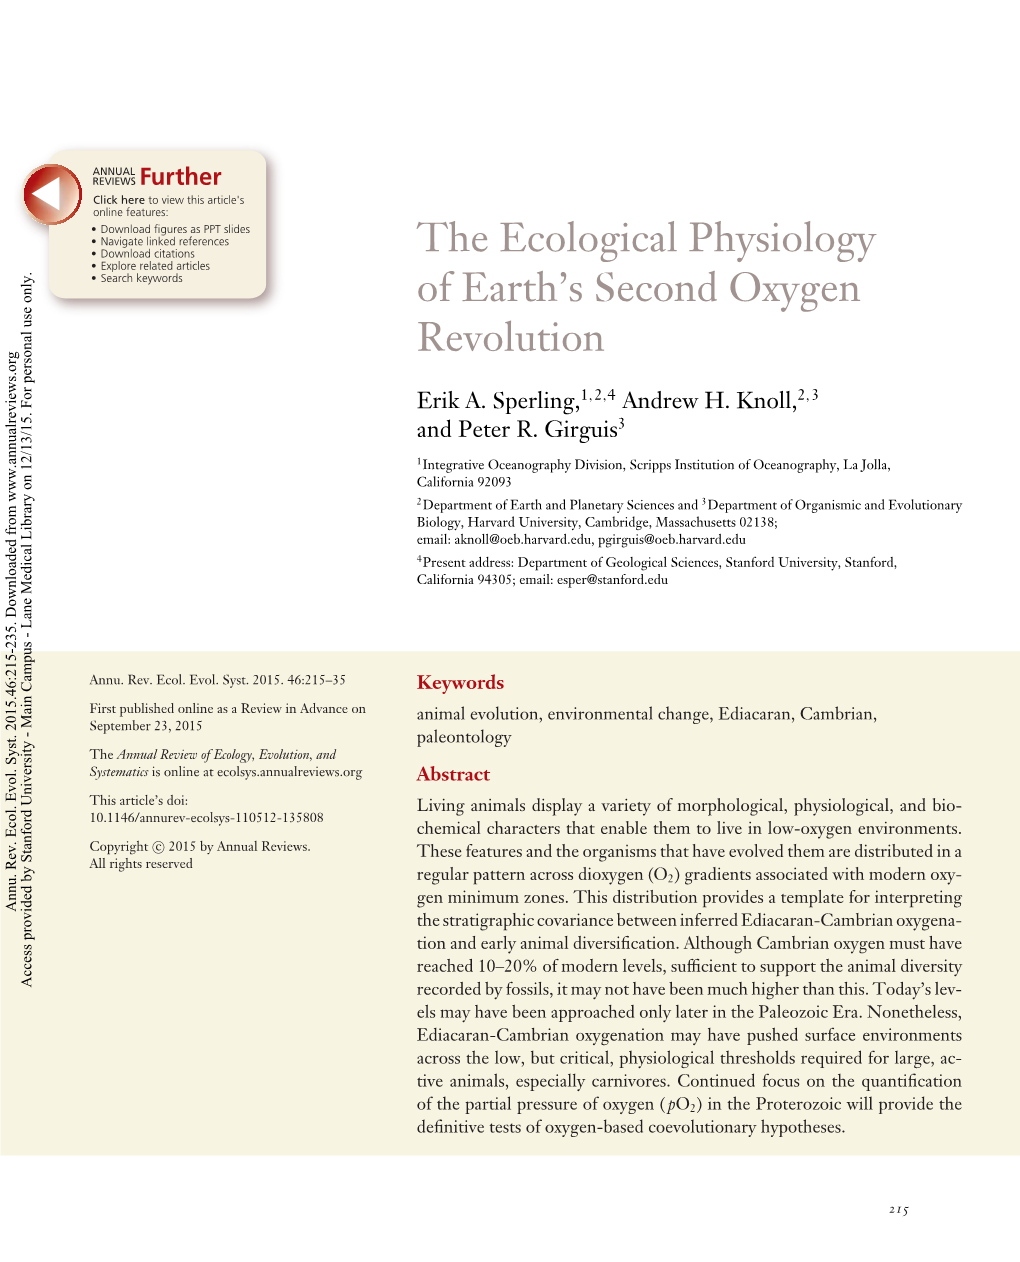 The Ecological Physiology of Earth's Second